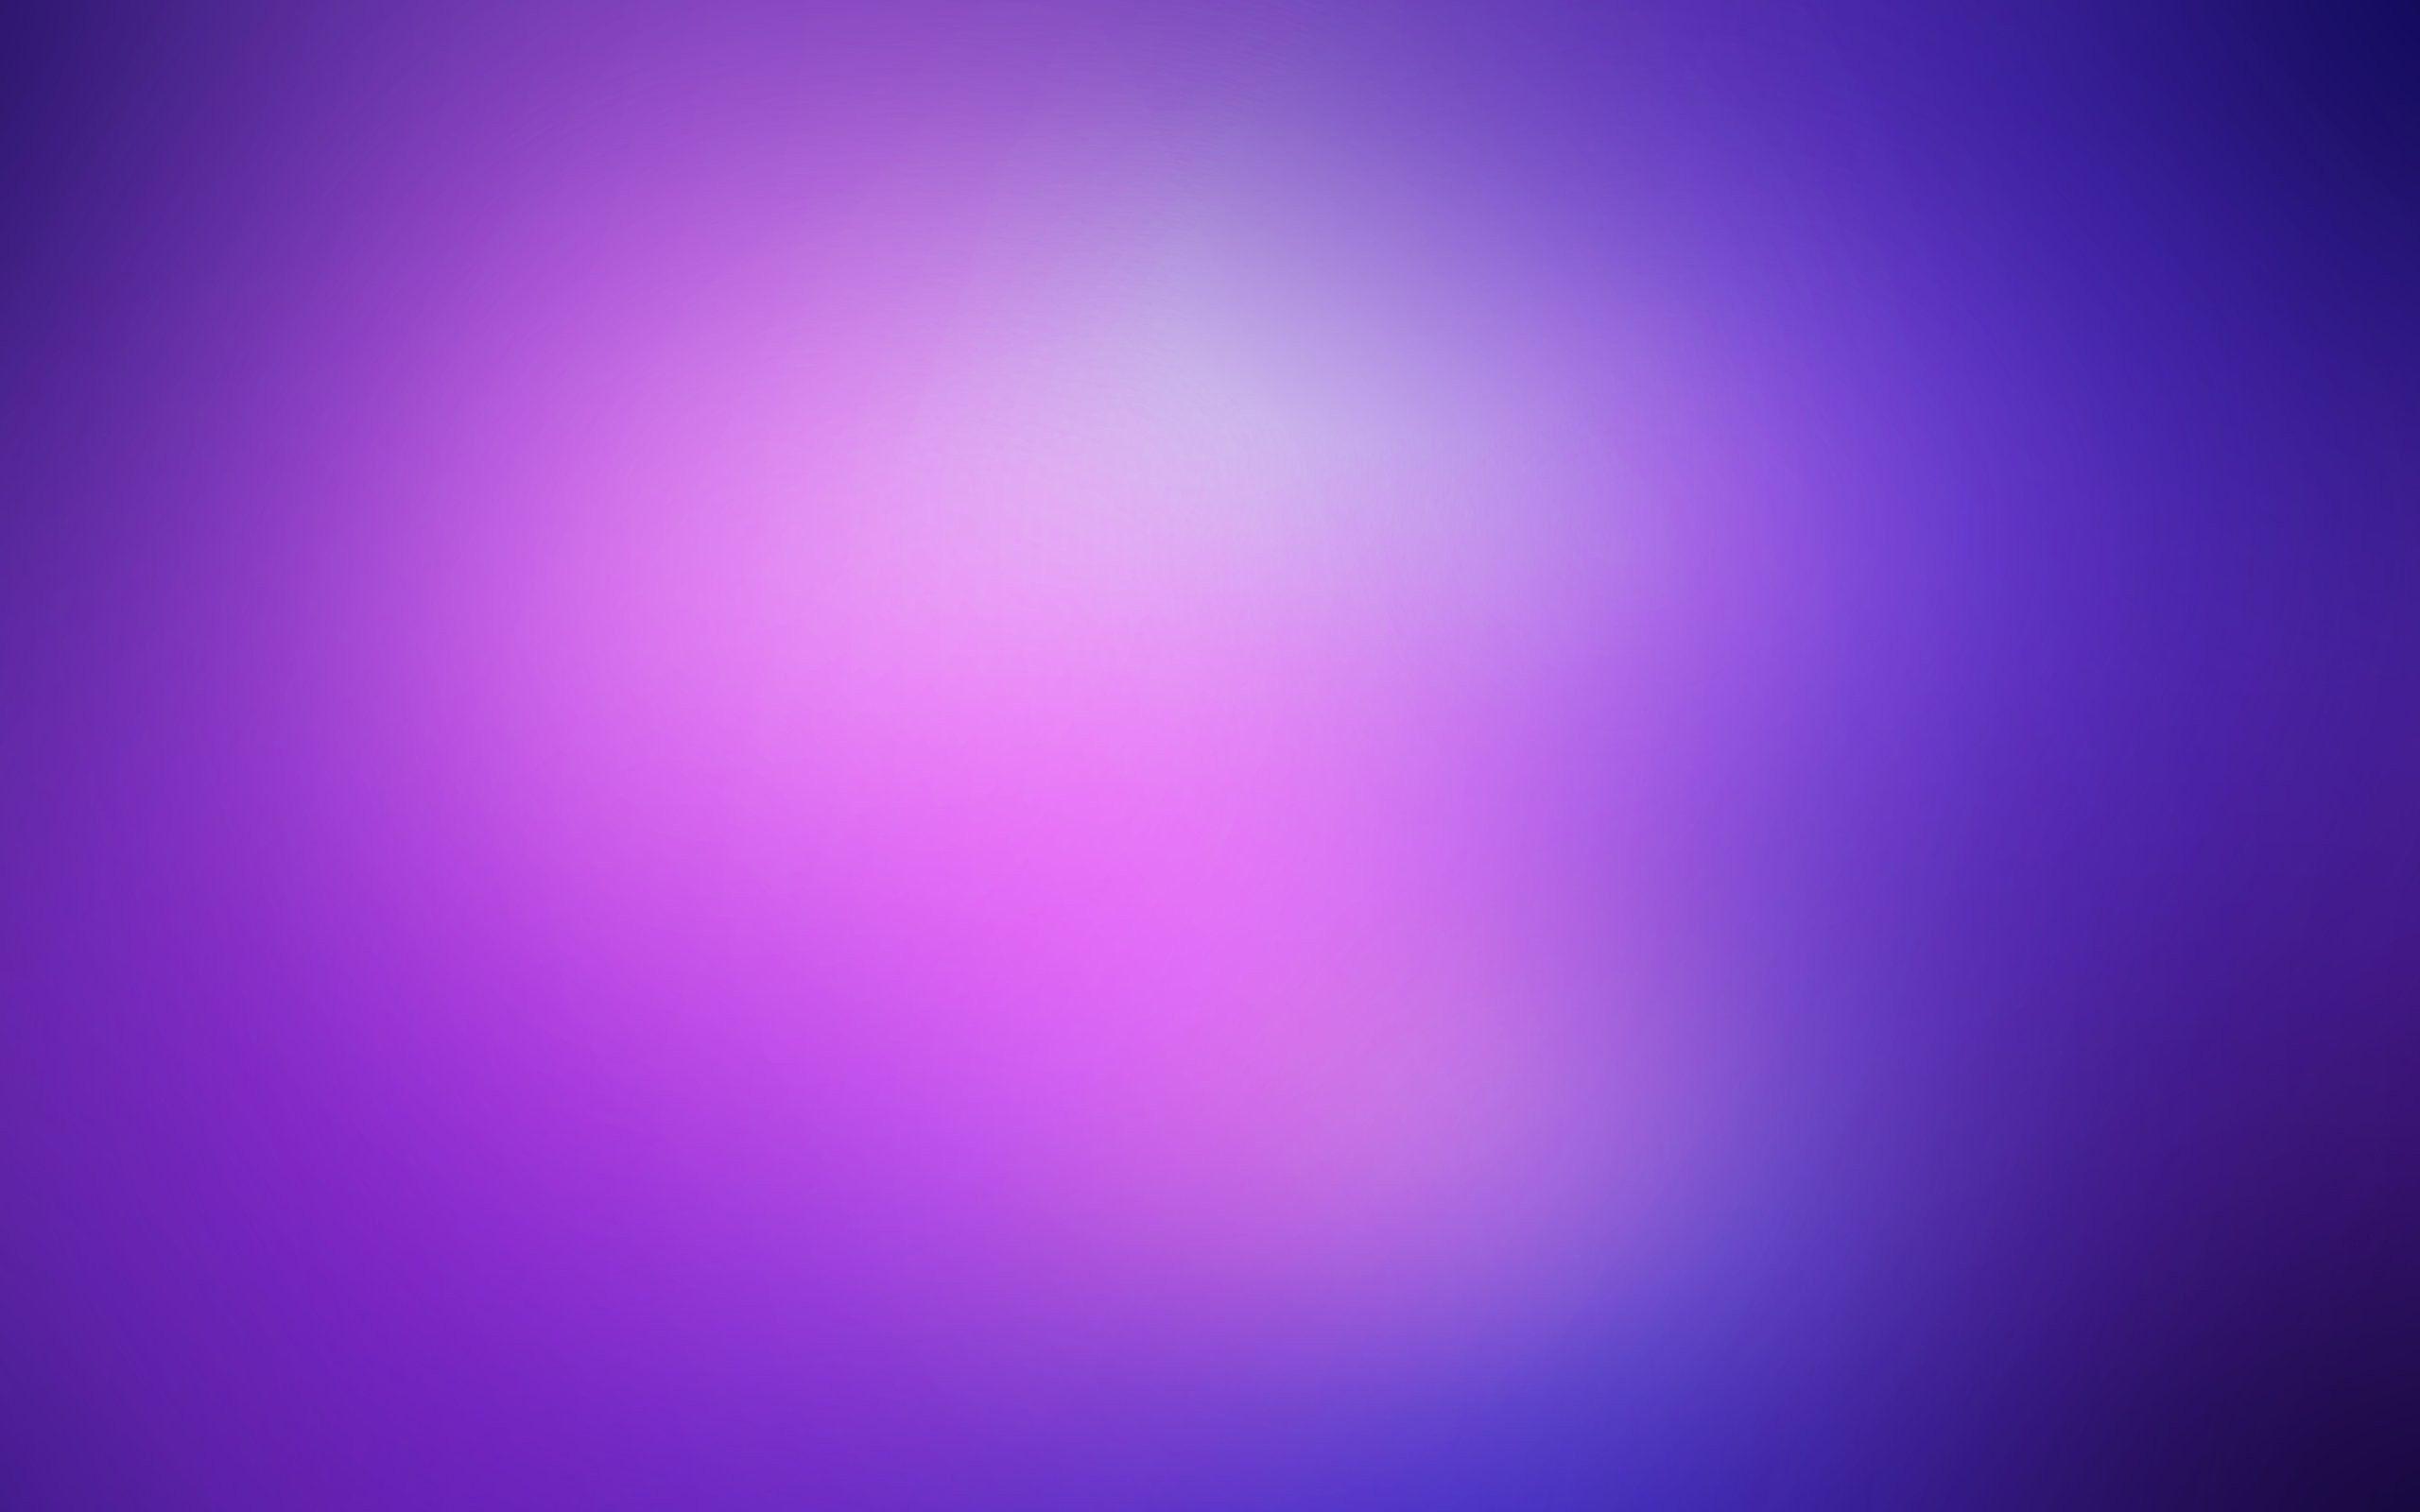 Solid Background Image Wallpaper. Purple wallpaper, Background image wallpaper, Colorful wallpaper